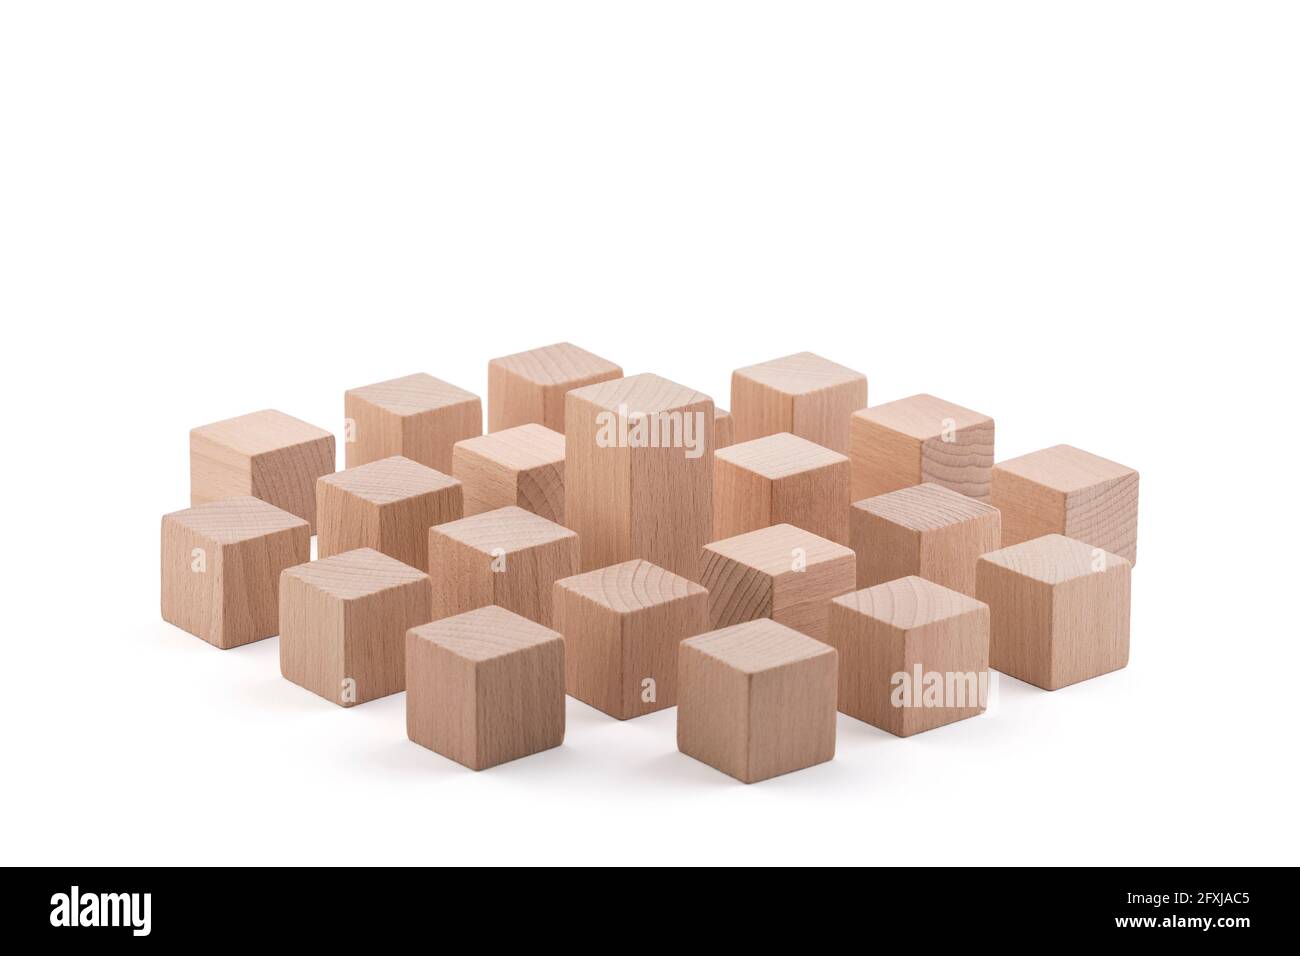 One different higher cube block among wooden blocks isolated on white with clipping path. Leadership concept. Stock Photo